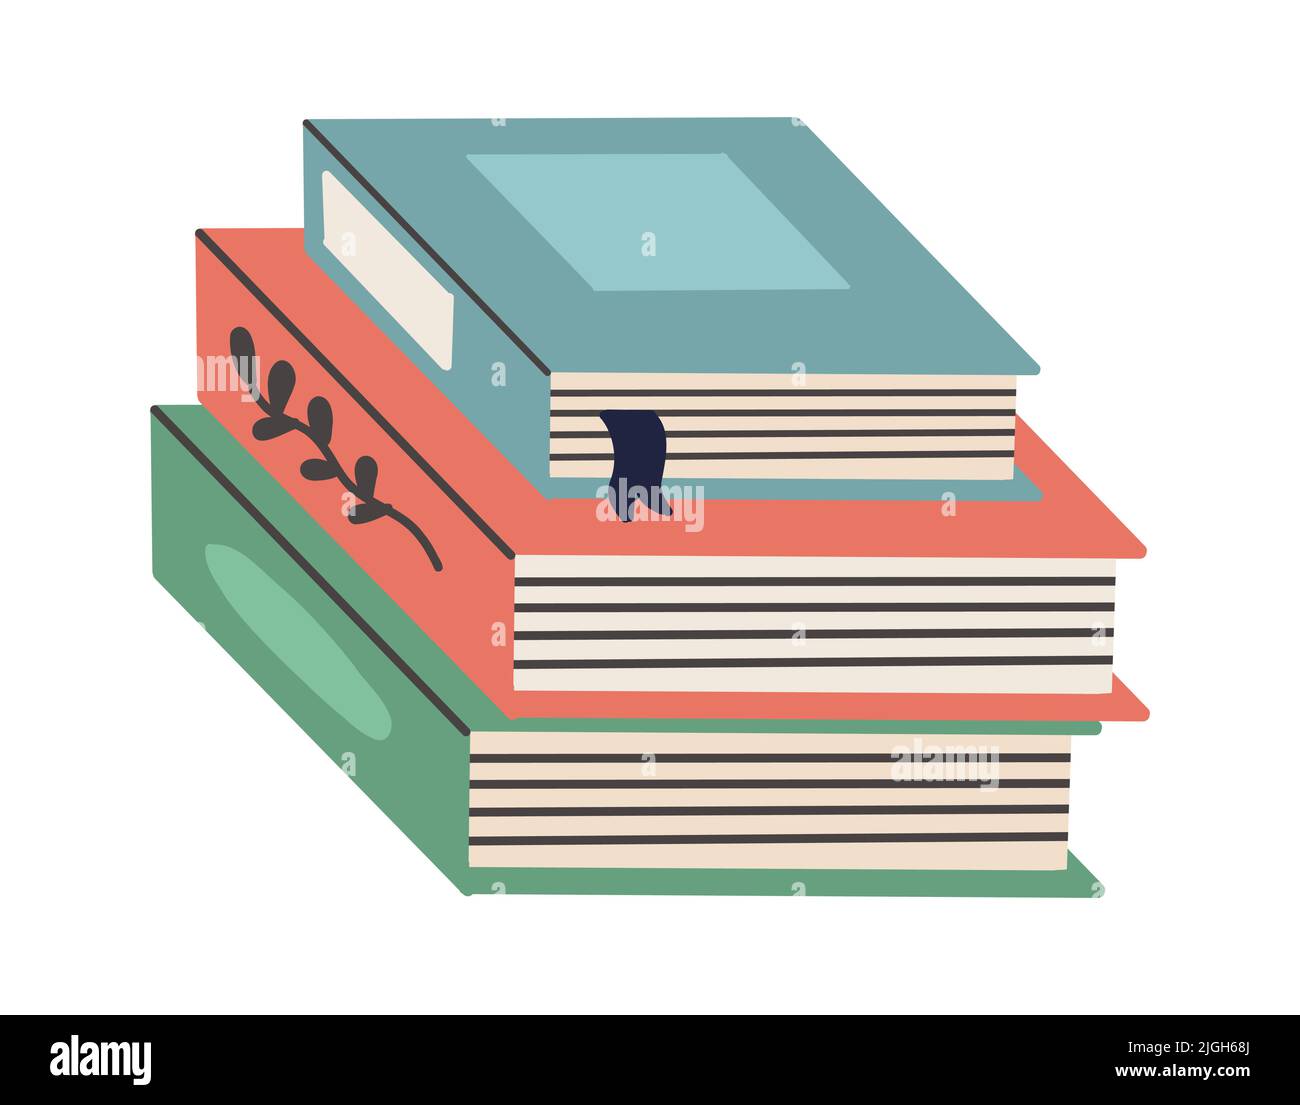 Pile of books notebook Stock Vector Images - Alamy